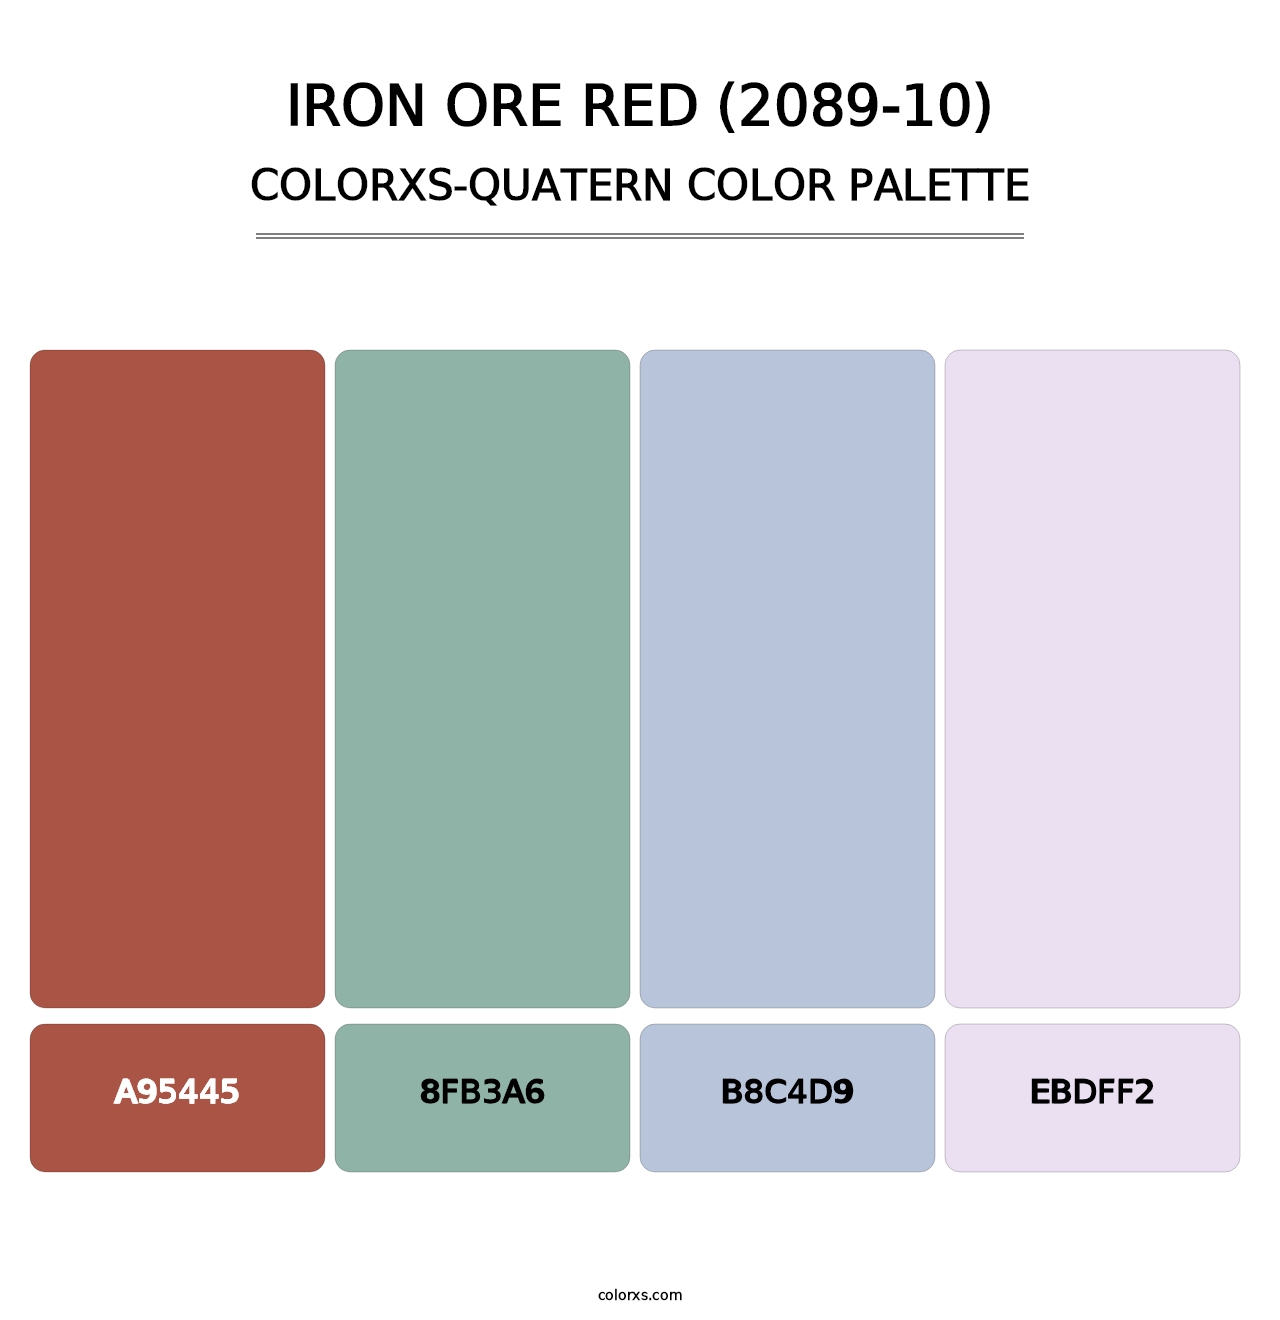 Iron Ore Red (2089-10) - Colorxs Quatern Palette